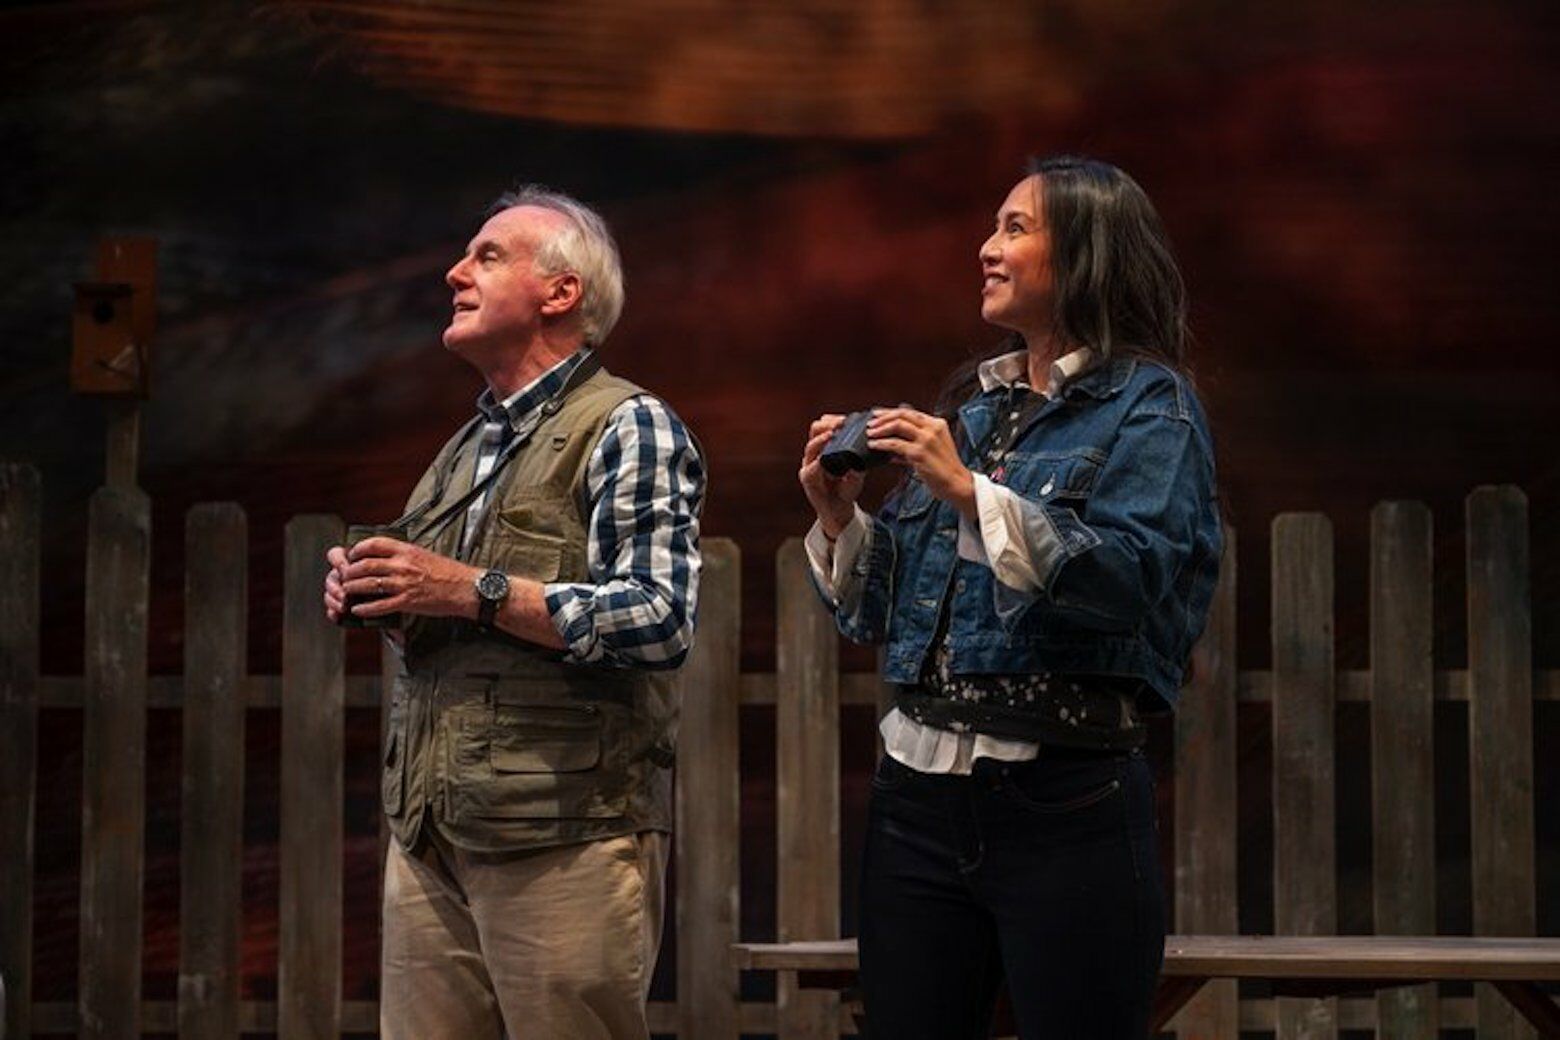 Mosaic Theater stages ‘Birds of North America’ about family, climate change - WTOP